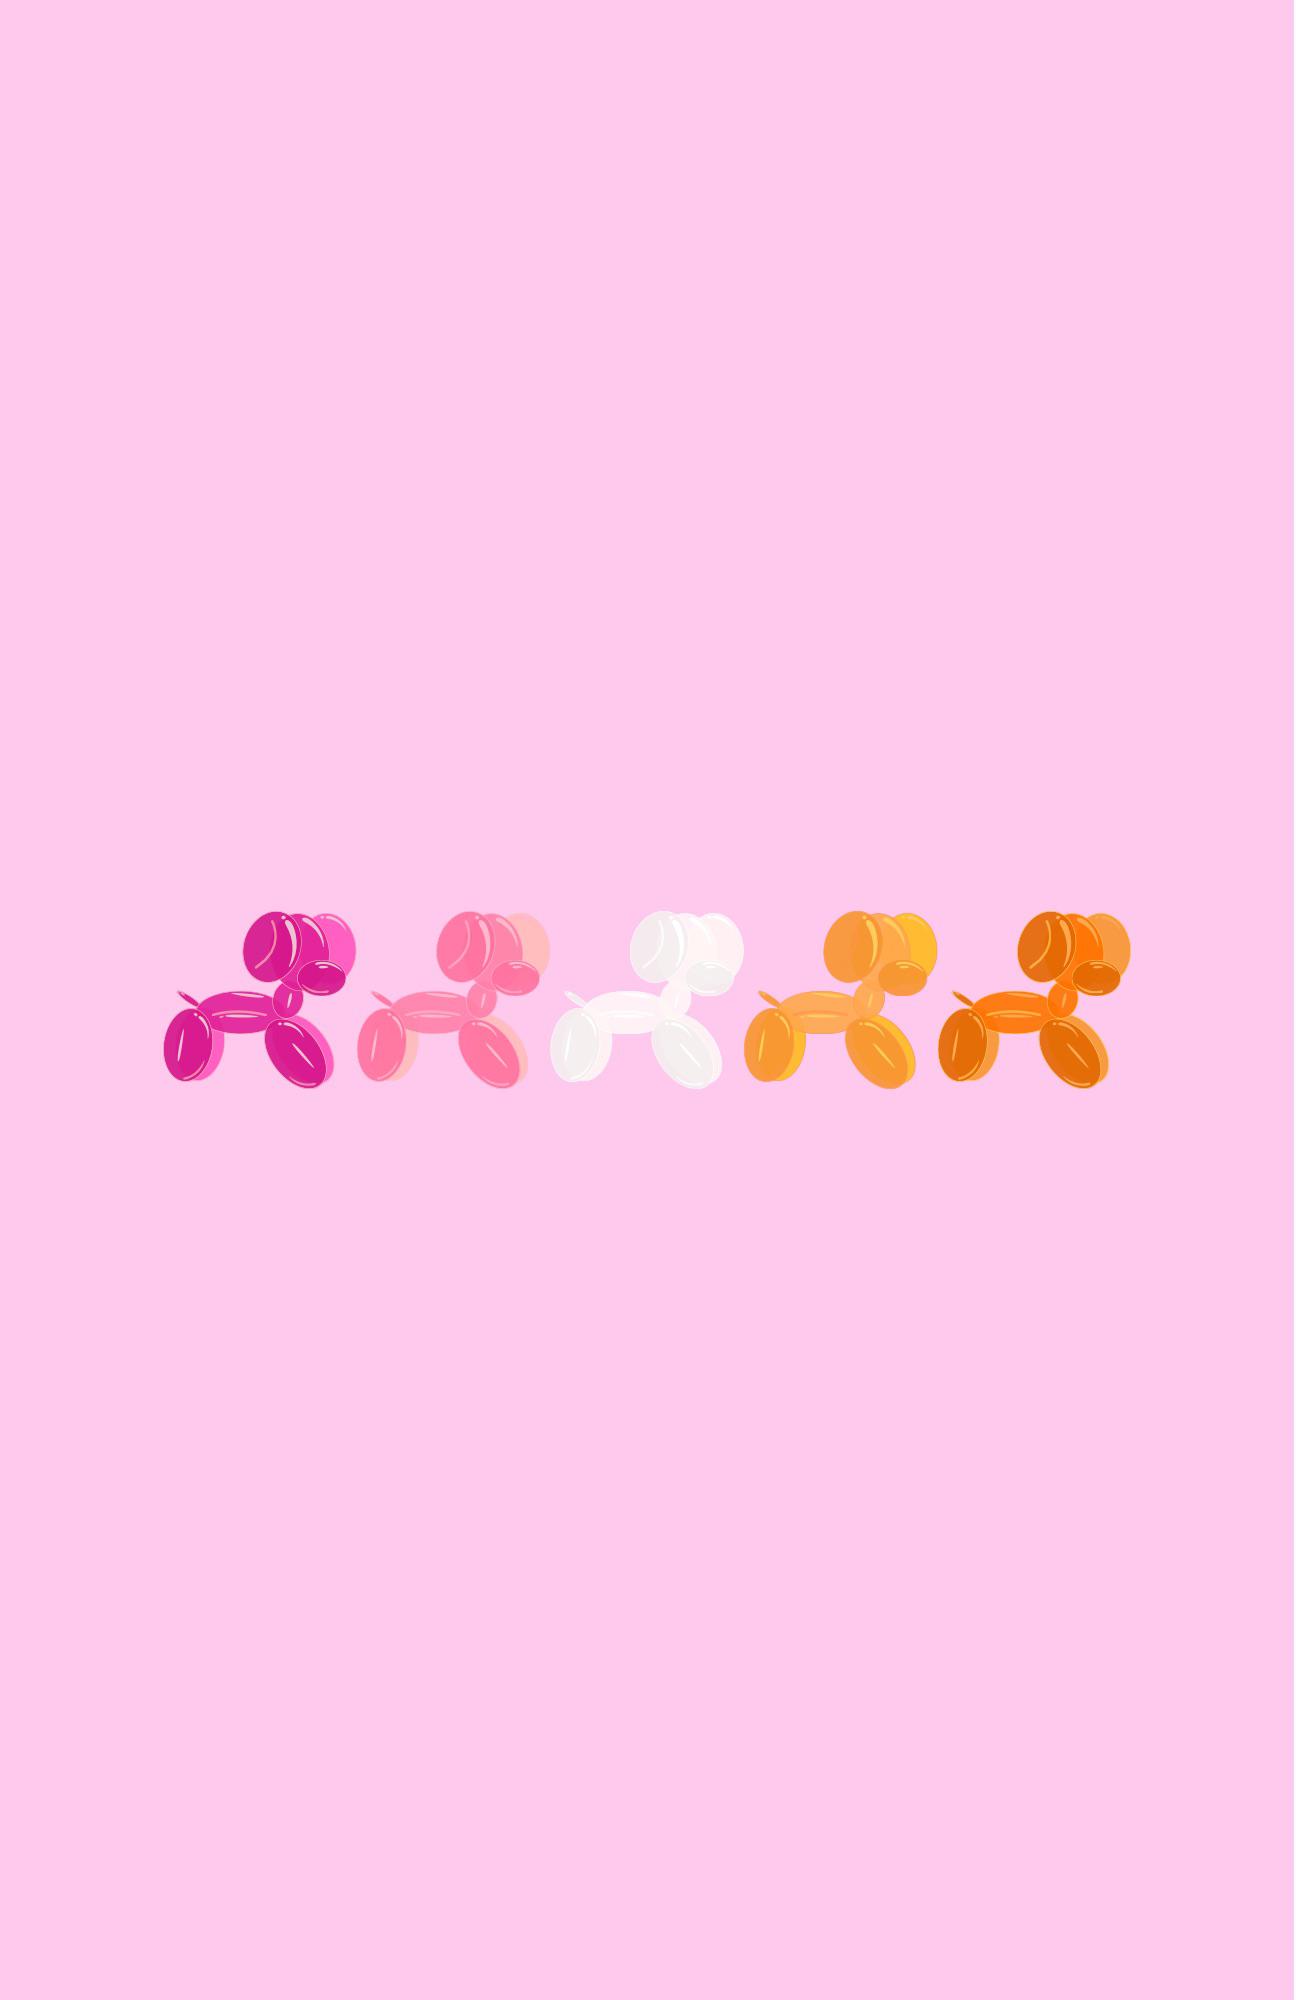 A row of balloons in the shape of dogs on a pink background - Lesbian